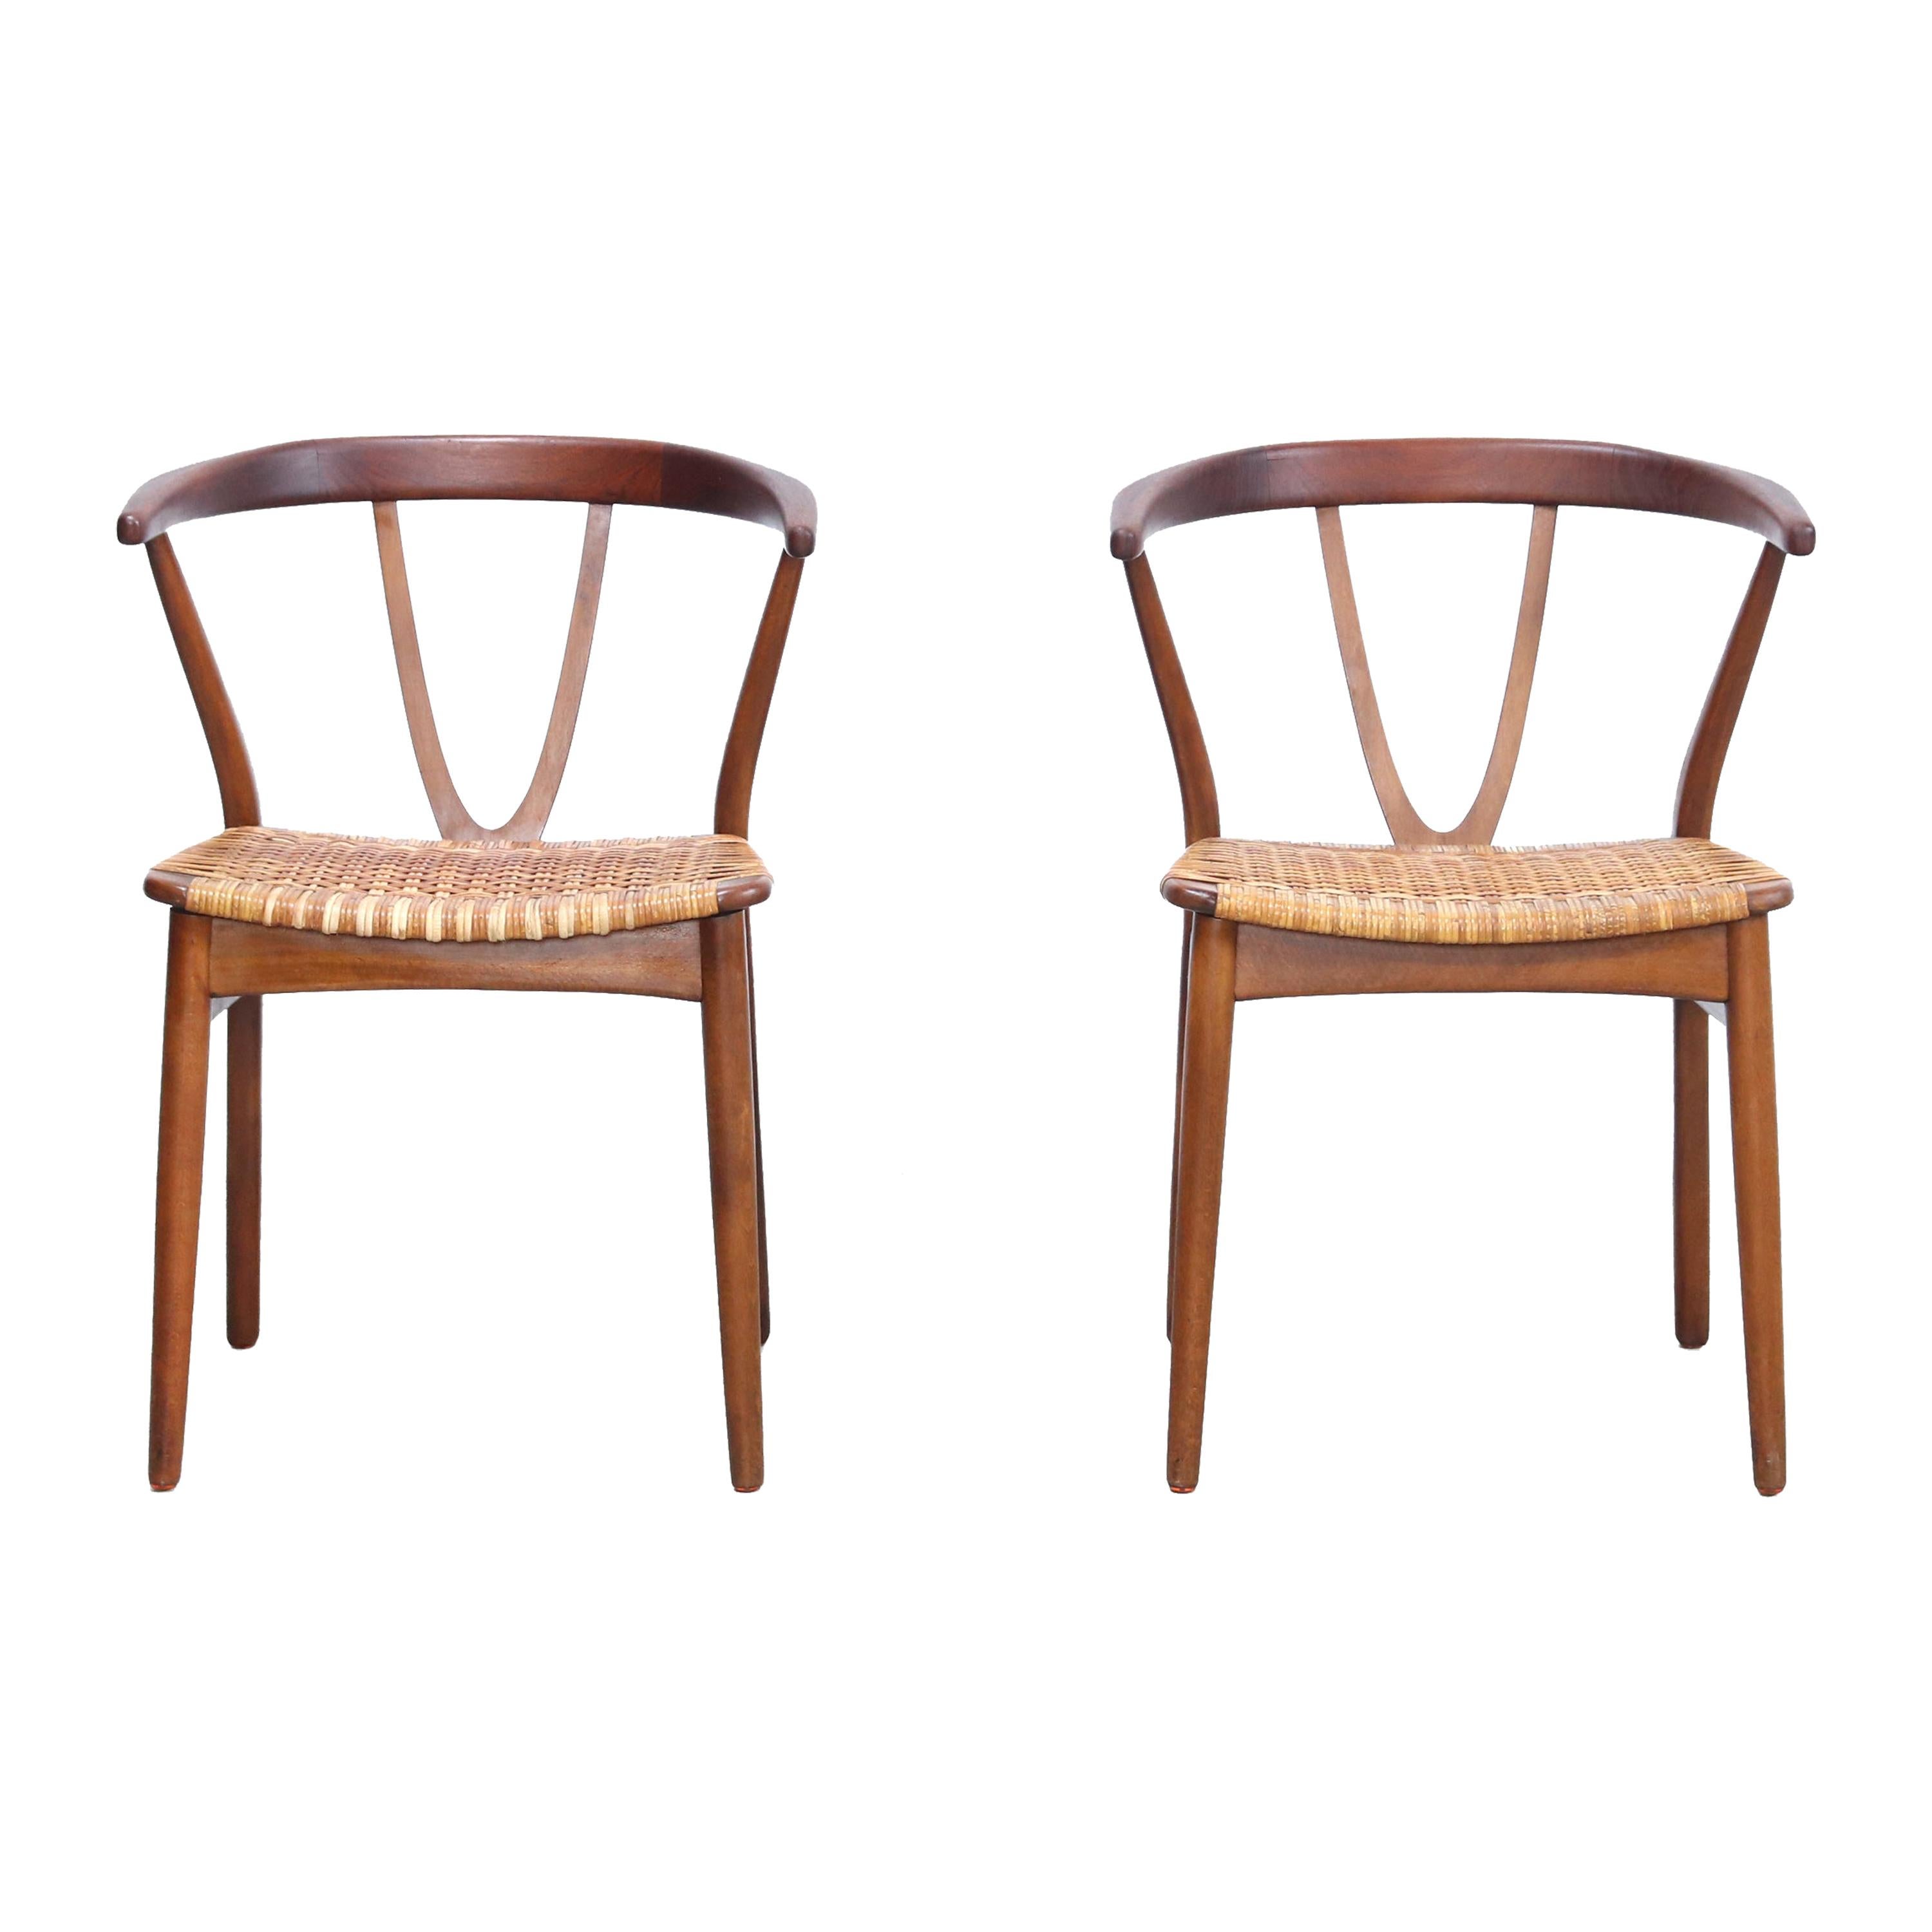 Set of Two Henning Kjaernulf Model 225 Chairs for Bruno Hansen in Teak with Cane